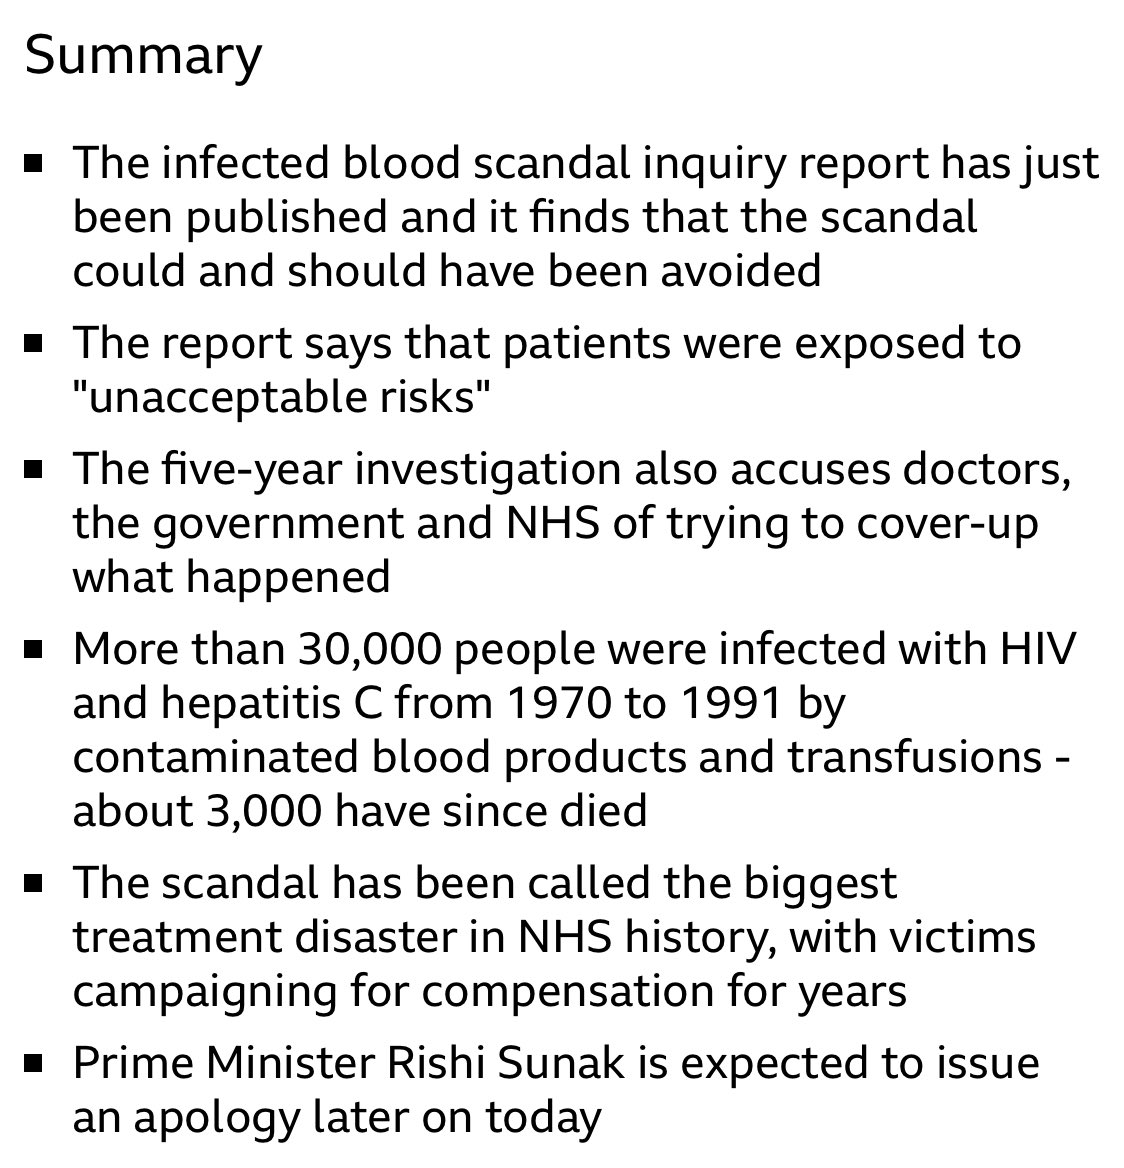 The infected blood scandal happened because we lowered standards to save £ Cheap blood was bought from prisons in the US - It was known to be riskier but cheaper Thousands of patients were exposed to this known risk by complicit Doctors Dropping standards for convenience is